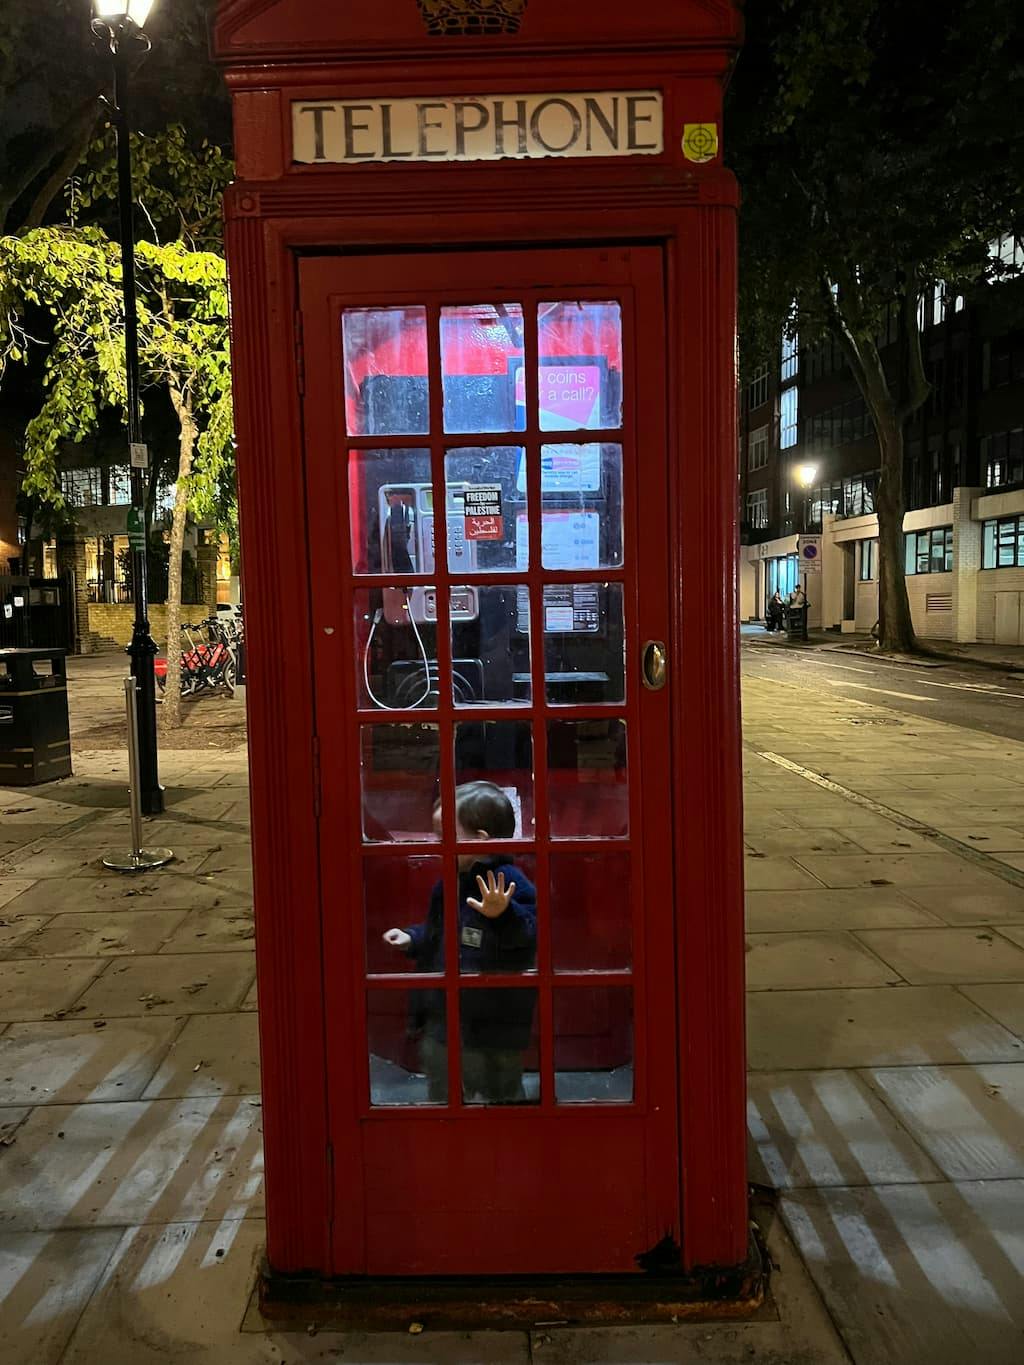 O in a classic red phone booth in London